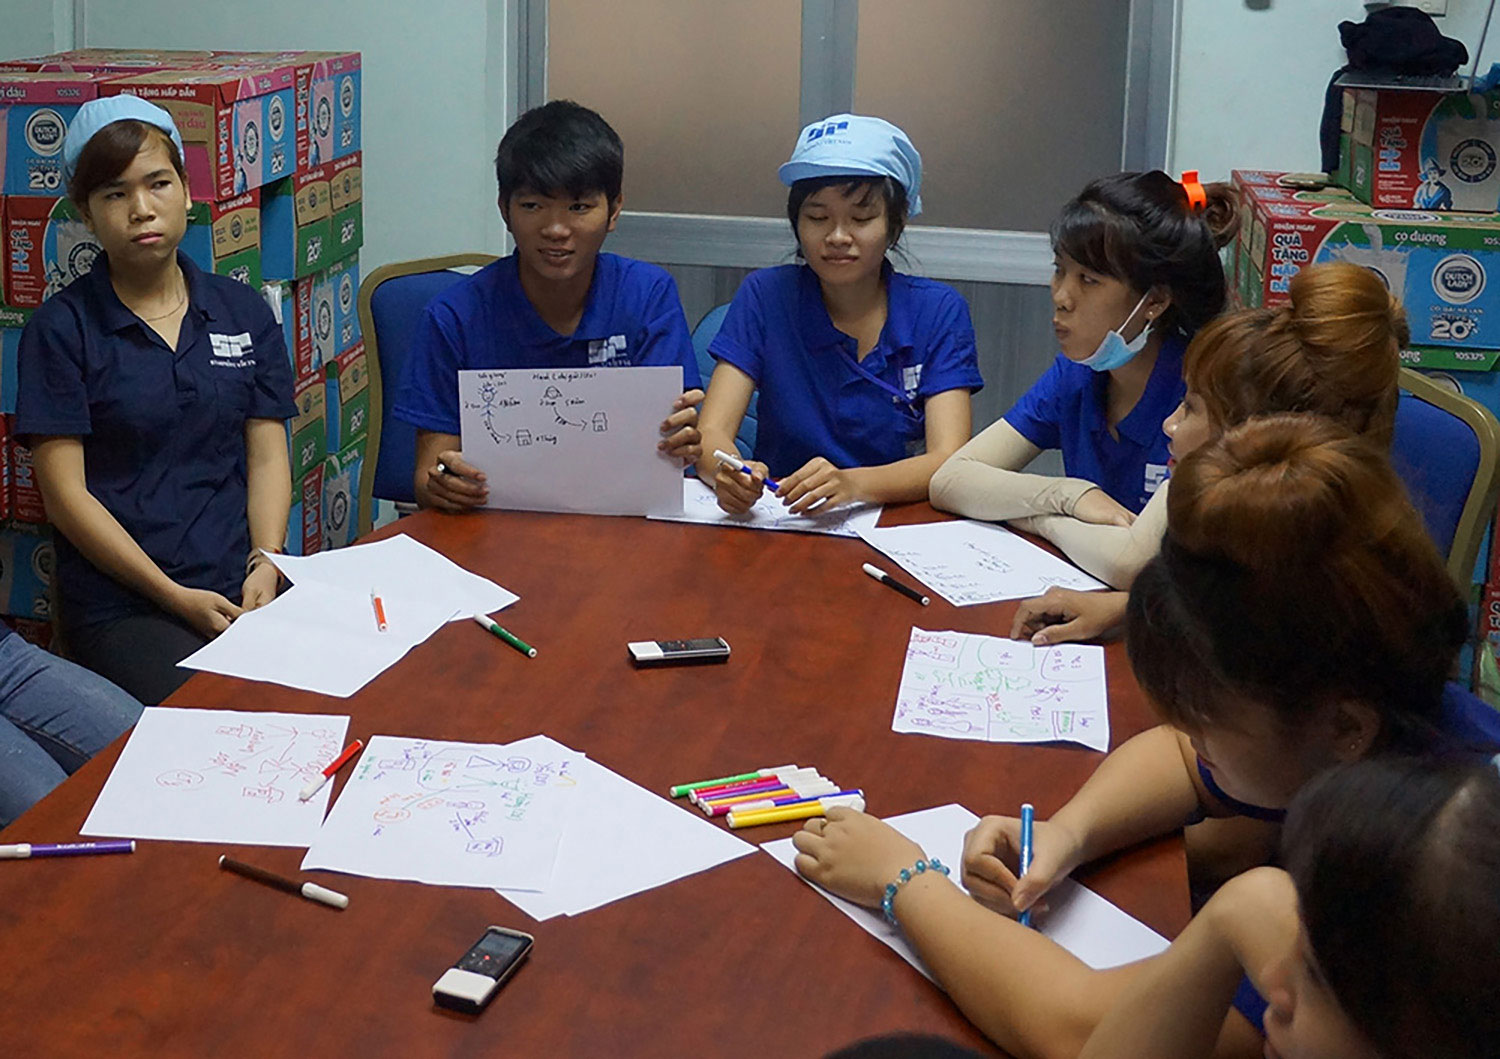 Assessment of Child Rights in Vietnam's Manufacturing Industry